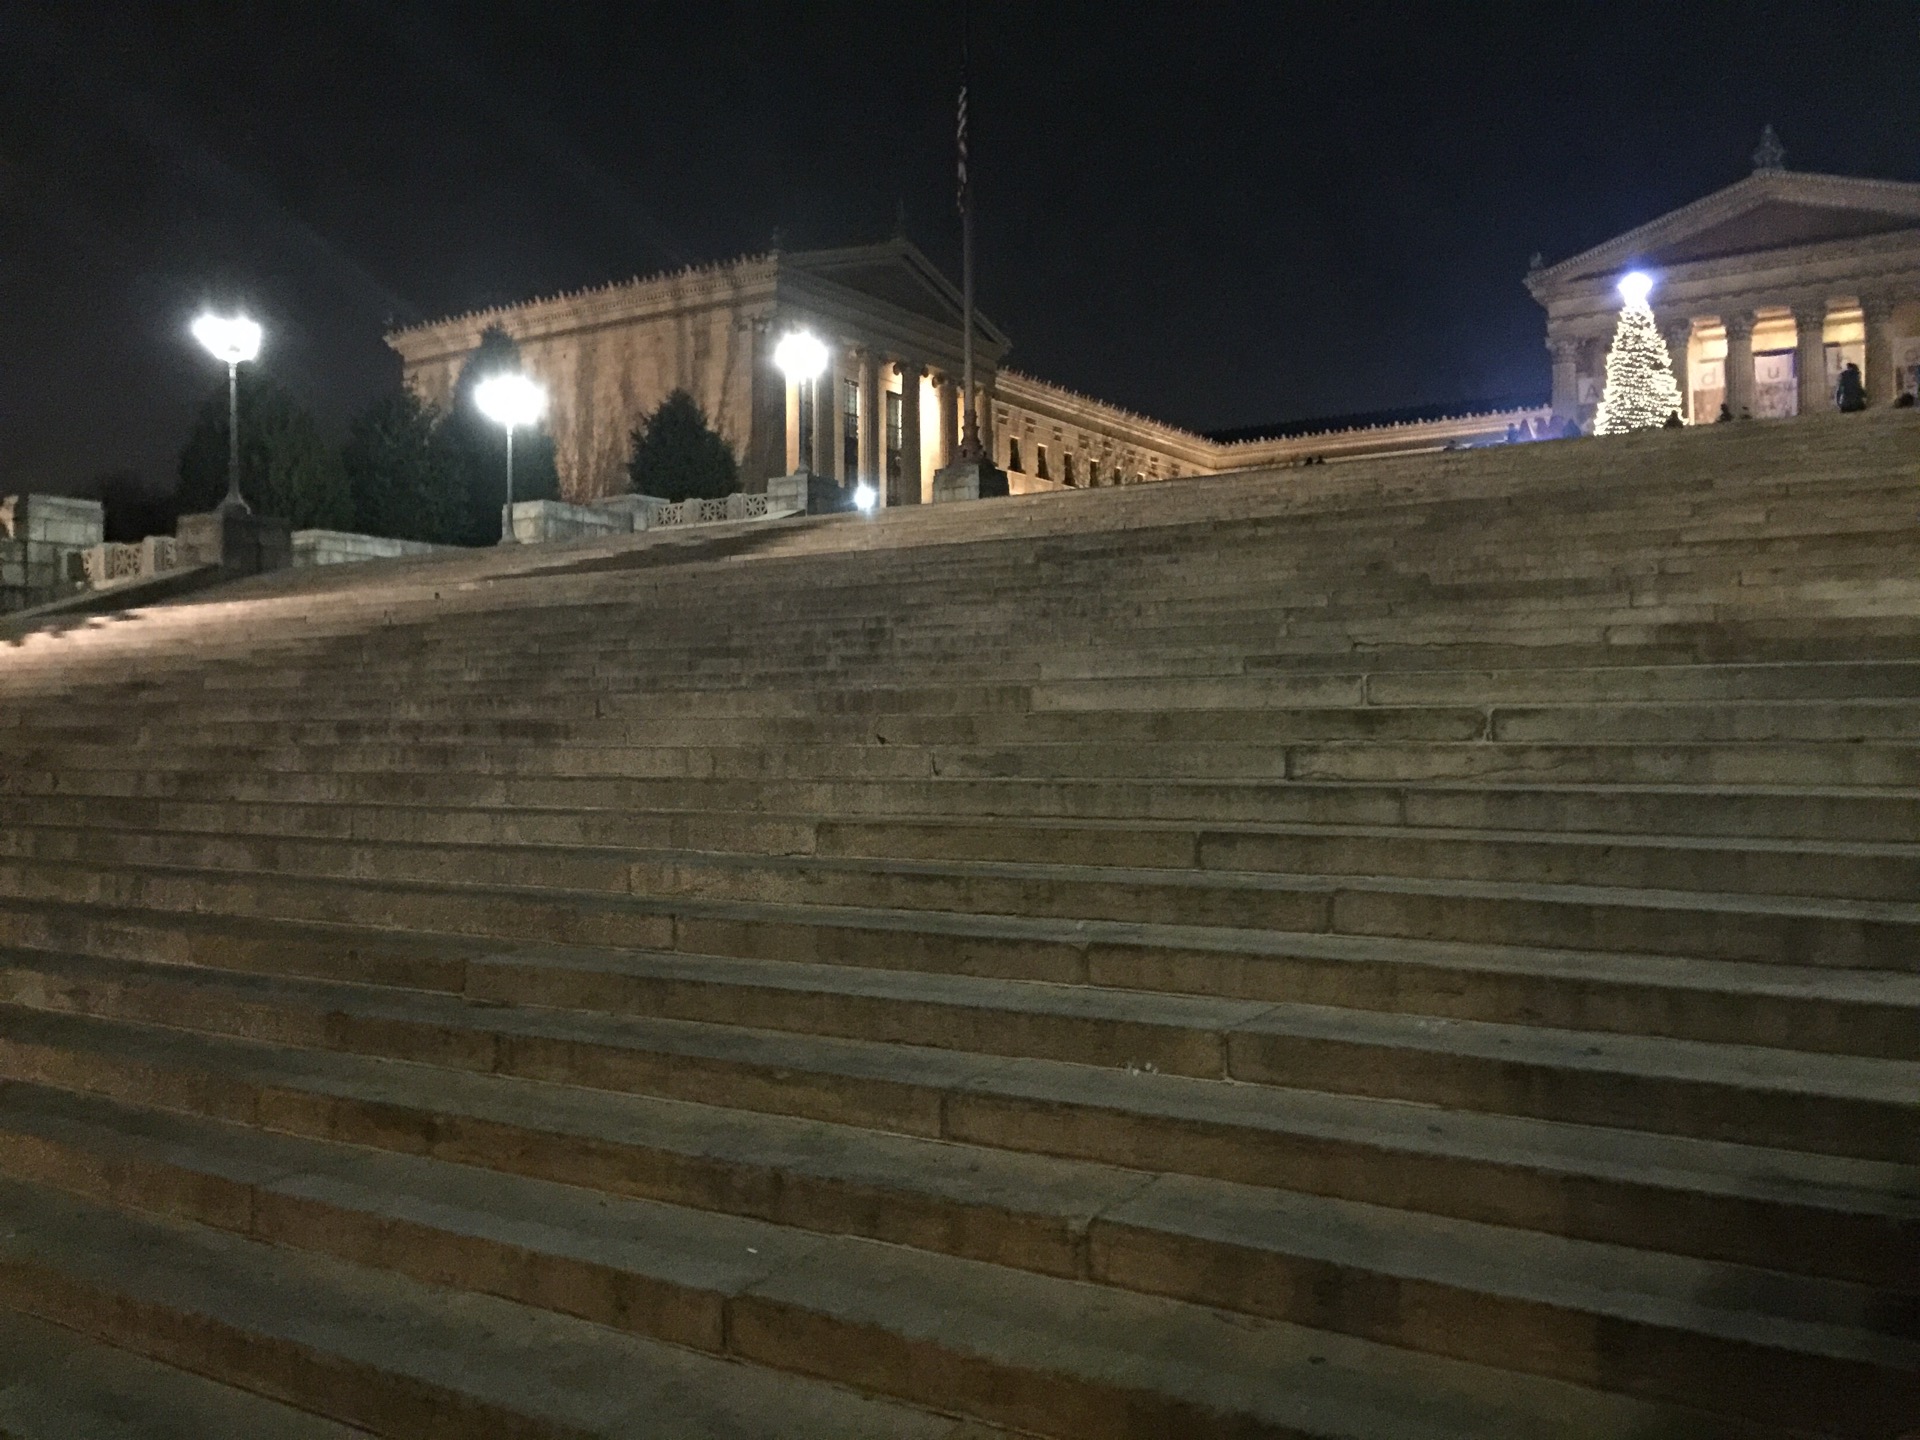 Checked in at Art Museum Steps